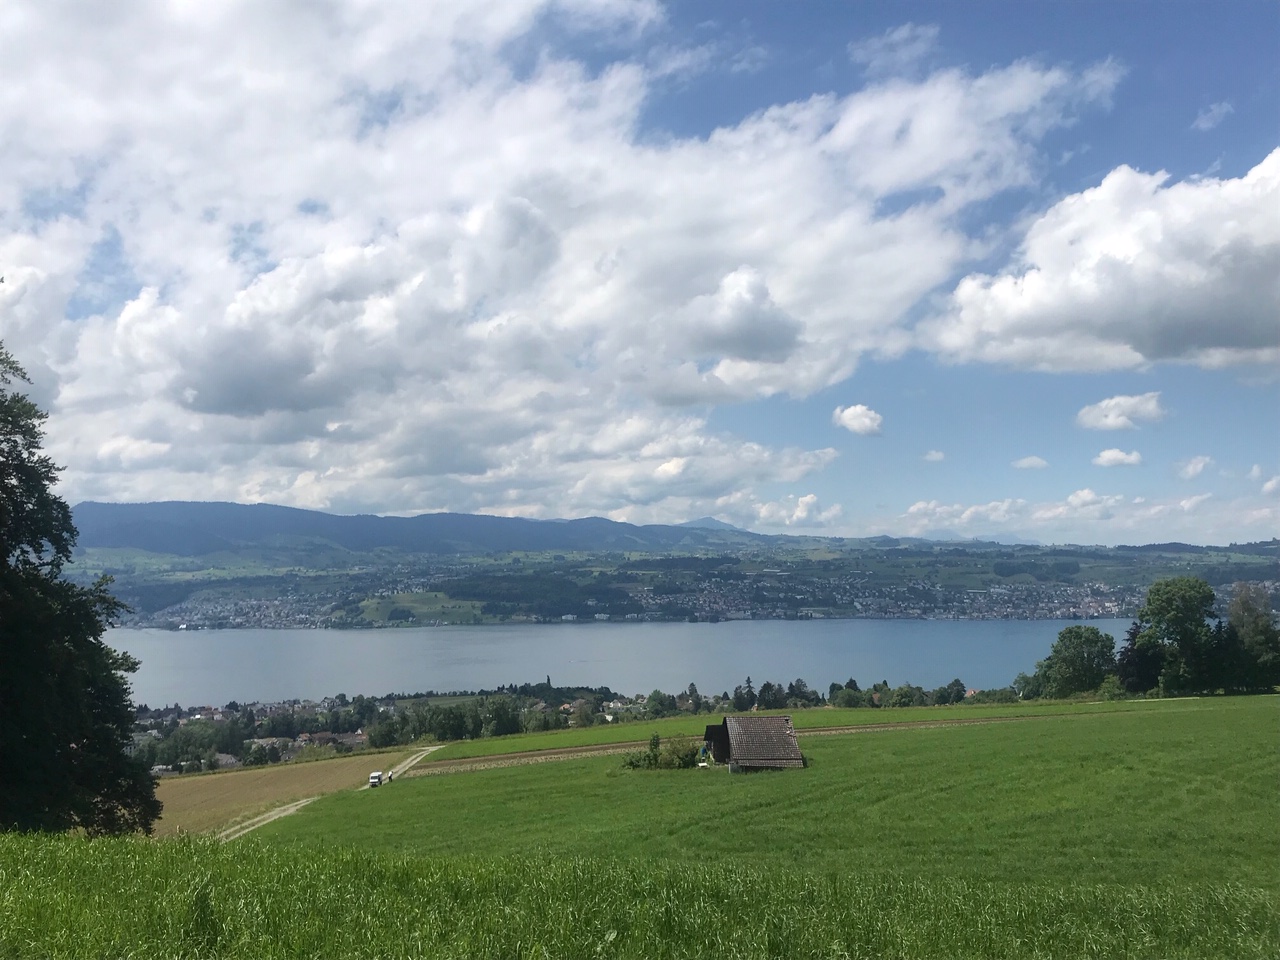 6/13 - Long hike from Zurich to Rapperswil